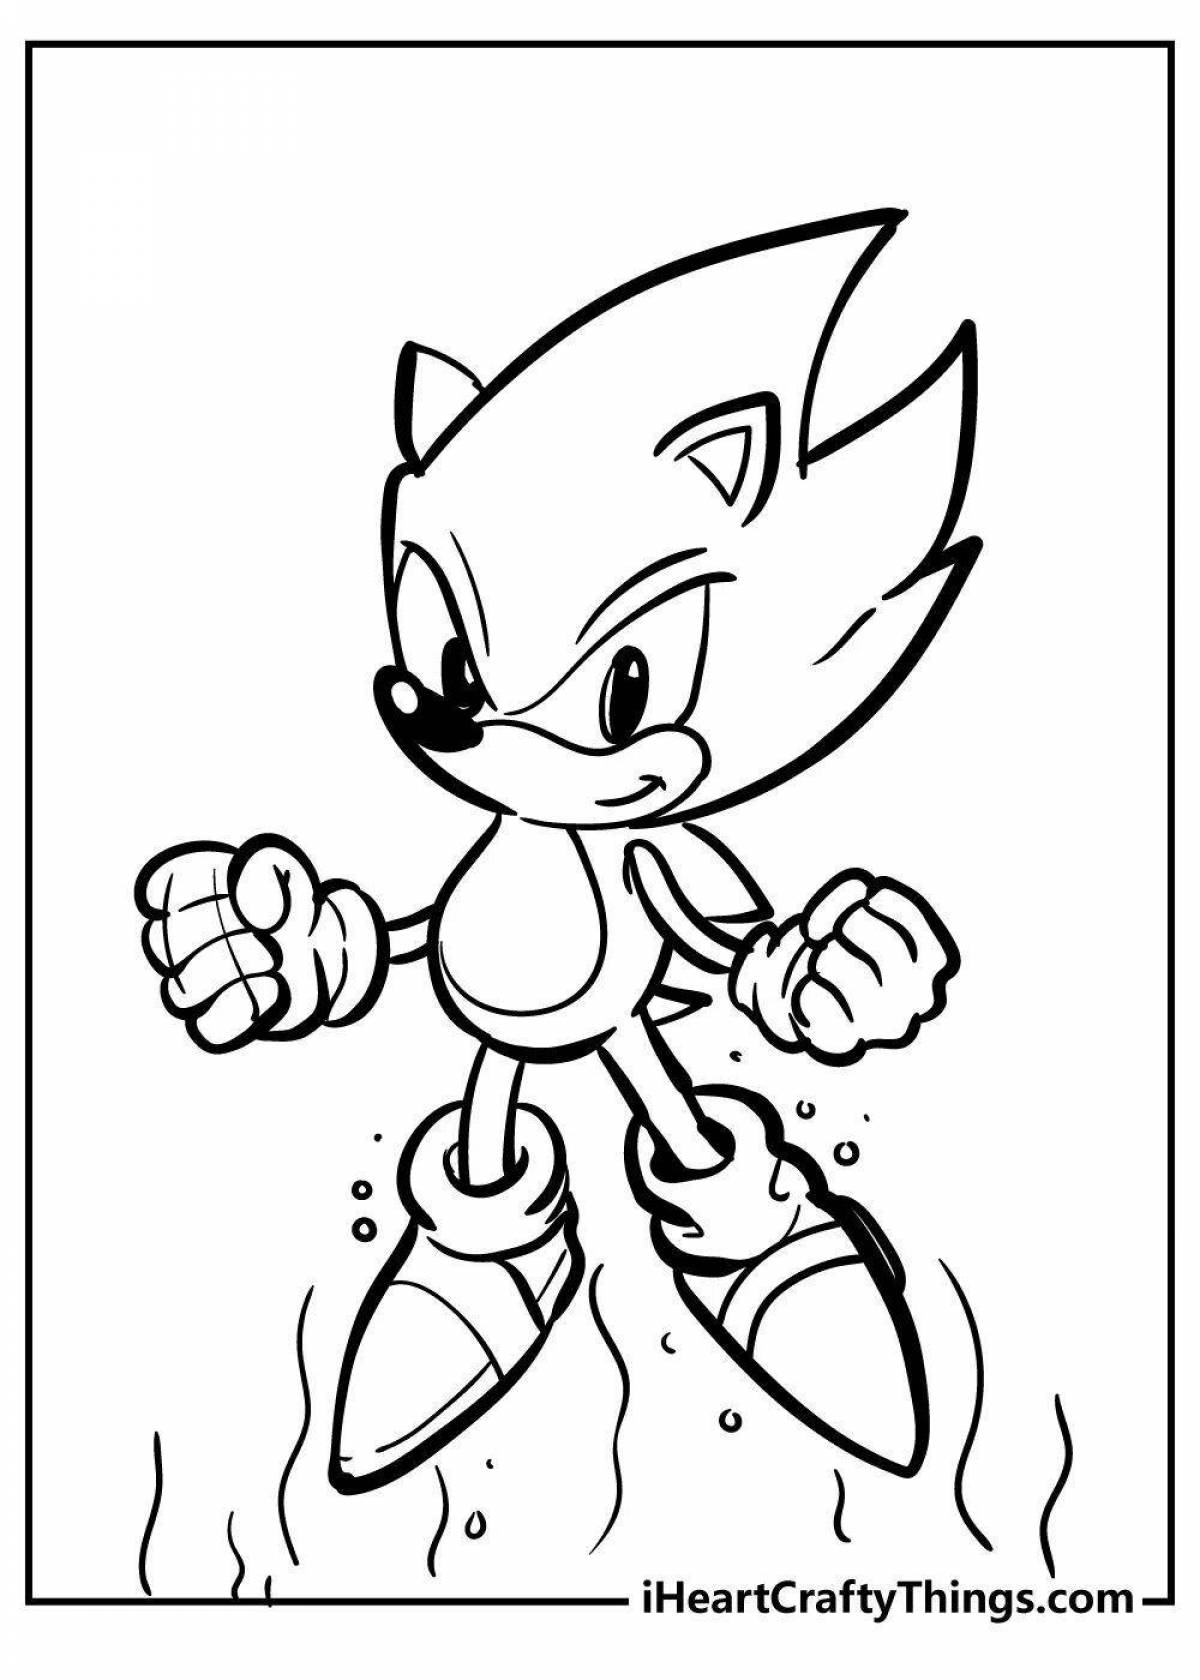 Sonic tails and knuckles fun coloring book